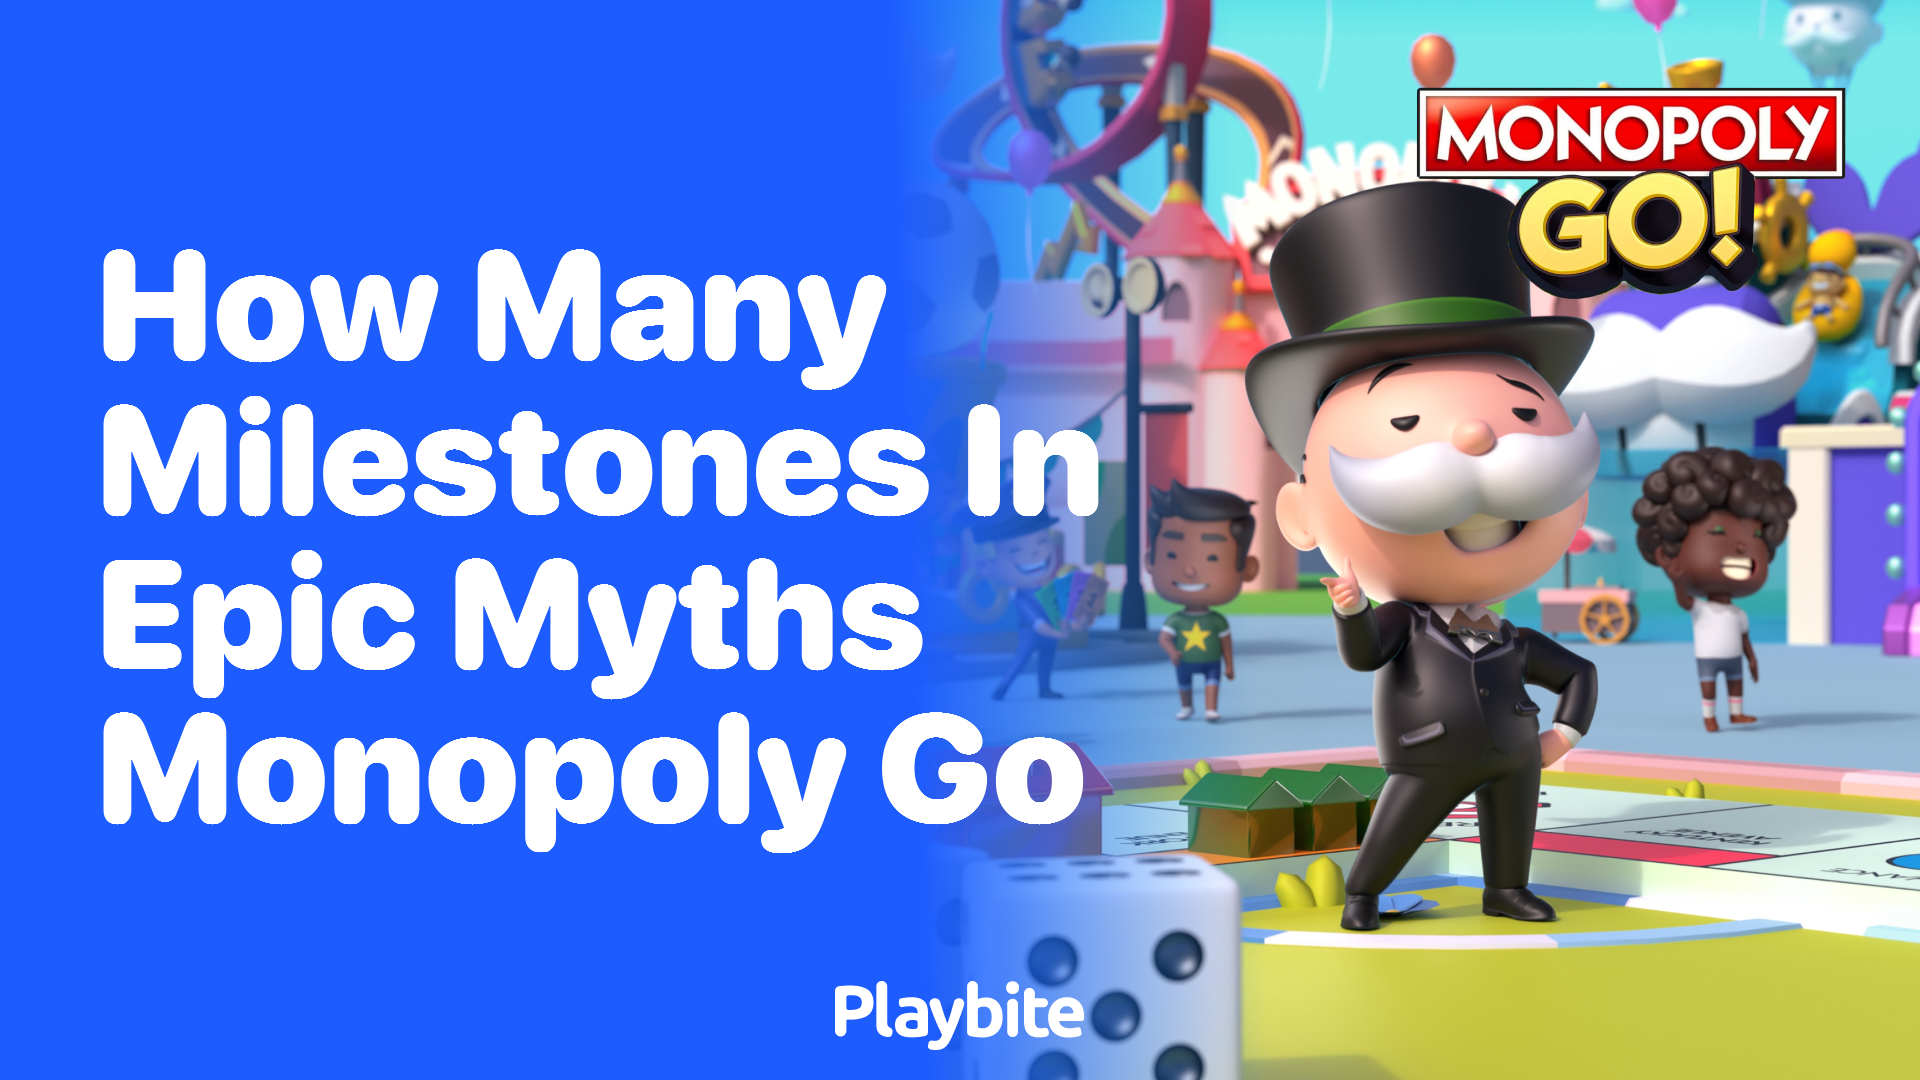 How Many Milestones Are There in Epic Myths Monopoly Go?